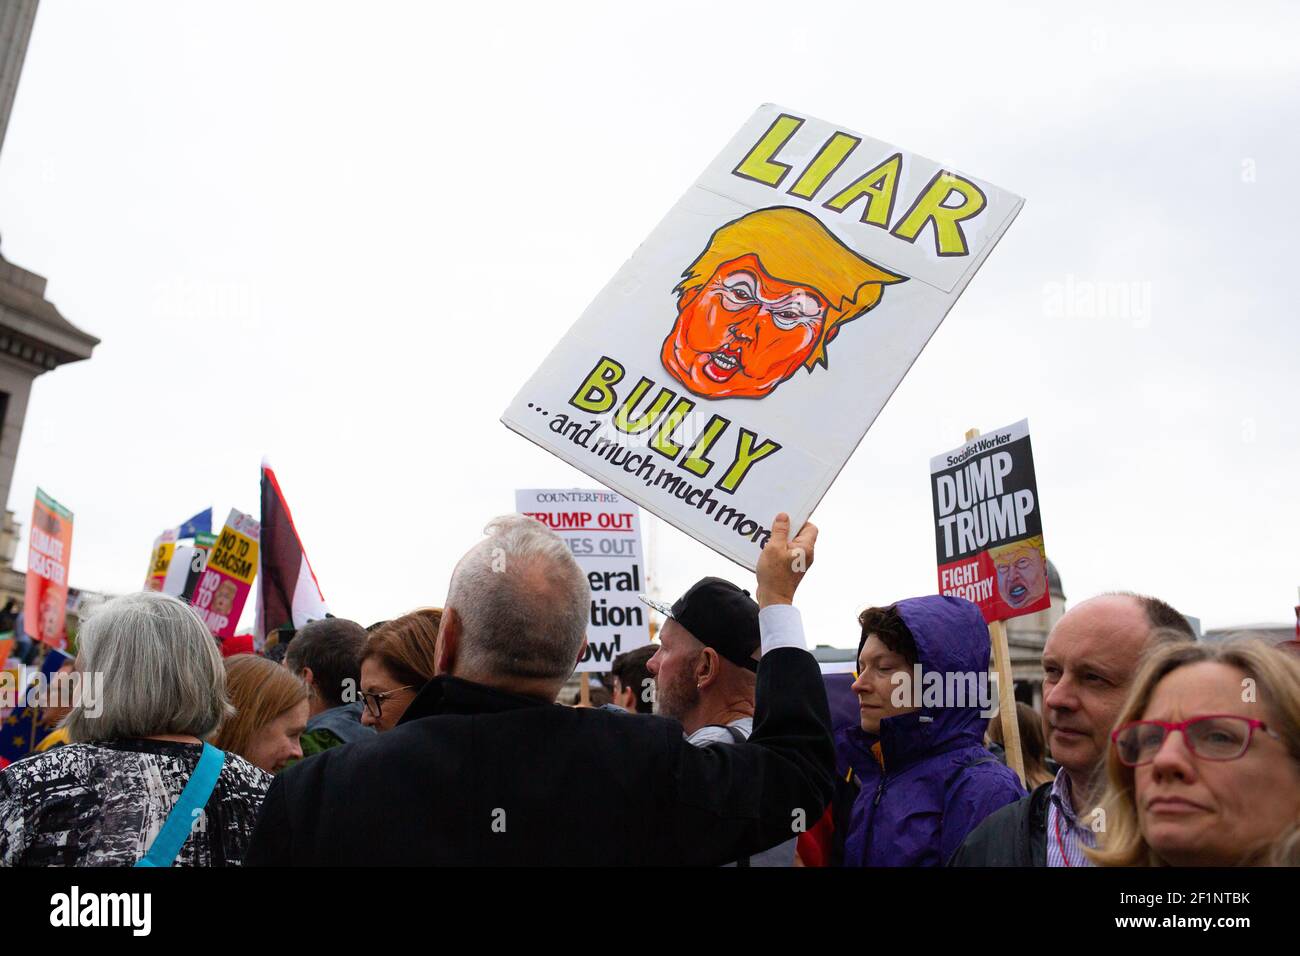 Protesters in Trafalgar Square, London, on the second day of the state visit to the UK by US President Donald Trump. Photo credit should read: Katie Collins/EMPICS/Alamy Stock Photo